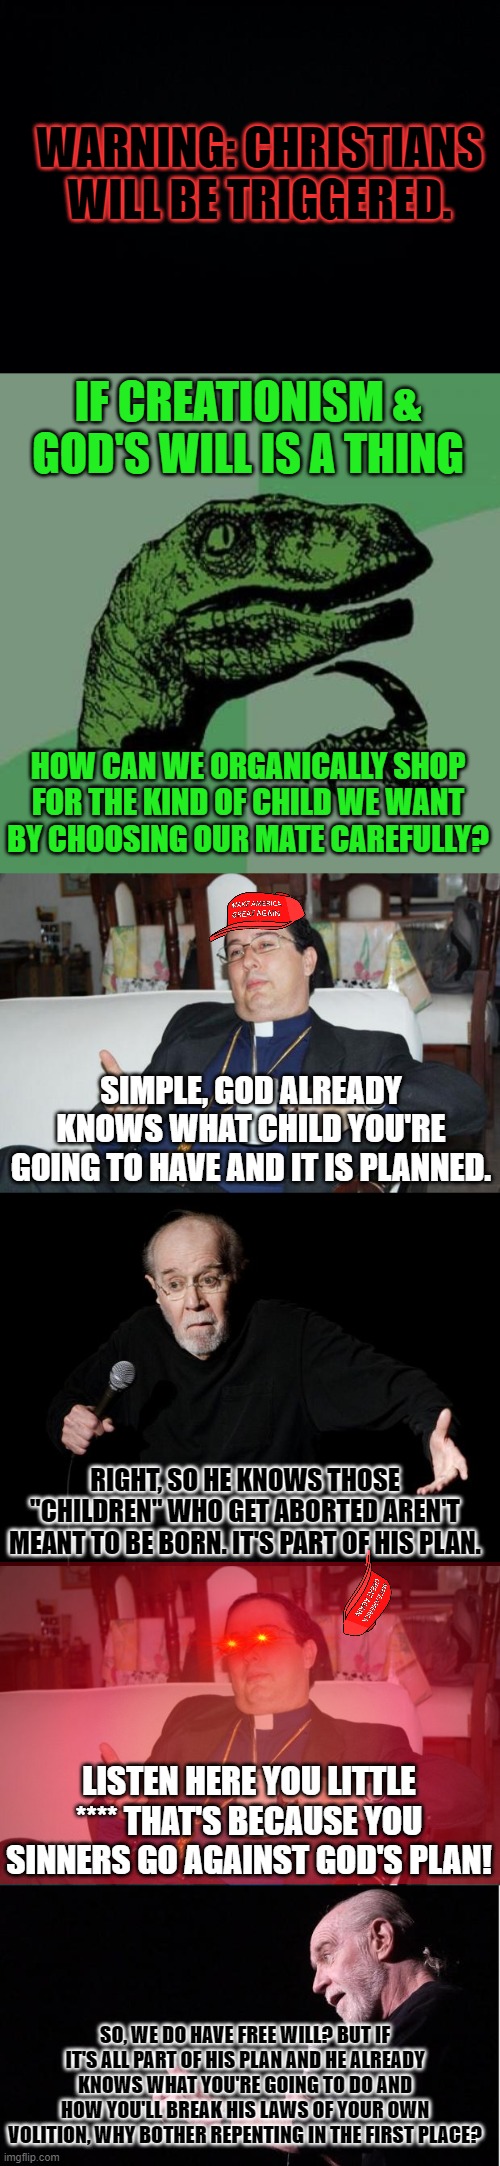 Food for thought | WARNING: CHRISTIANS WILL BE TRIGGERED. IF CREATIONISM & GOD'S WILL IS A THING; HOW CAN WE ORGANICALLY SHOP FOR THE KIND OF CHILD WE WANT BY CHOOSING OUR MATE CAREFULLY? SIMPLE, GOD ALREADY KNOWS WHAT CHILD YOU'RE GOING TO HAVE AND IT IS PLANNED. RIGHT, SO HE KNOWS THOSE "CHILDREN" WHO GET ABORTED AREN'T MEANT TO BE BORN. IT'S PART OF HIS PLAN. LISTEN HERE YOU LITTLE **** THAT'S BECAUSE YOU SINNERS GO AGAINST GOD'S PLAN! SO, WE DO HAVE FREE WILL? BUT IF IT'S ALL PART OF HIS PLAN AND HE ALREADY KNOWS WHAT YOU'RE GOING TO DO AND HOW YOU'LL BREAK HIS LAWS OF YOUR OWN VOLITION, WHY BOTHER REPENTING IN THE FIRST PLACE? | image tagged in black background,memes,philosoraptor,sleazy priest,george carlin | made w/ Imgflip meme maker